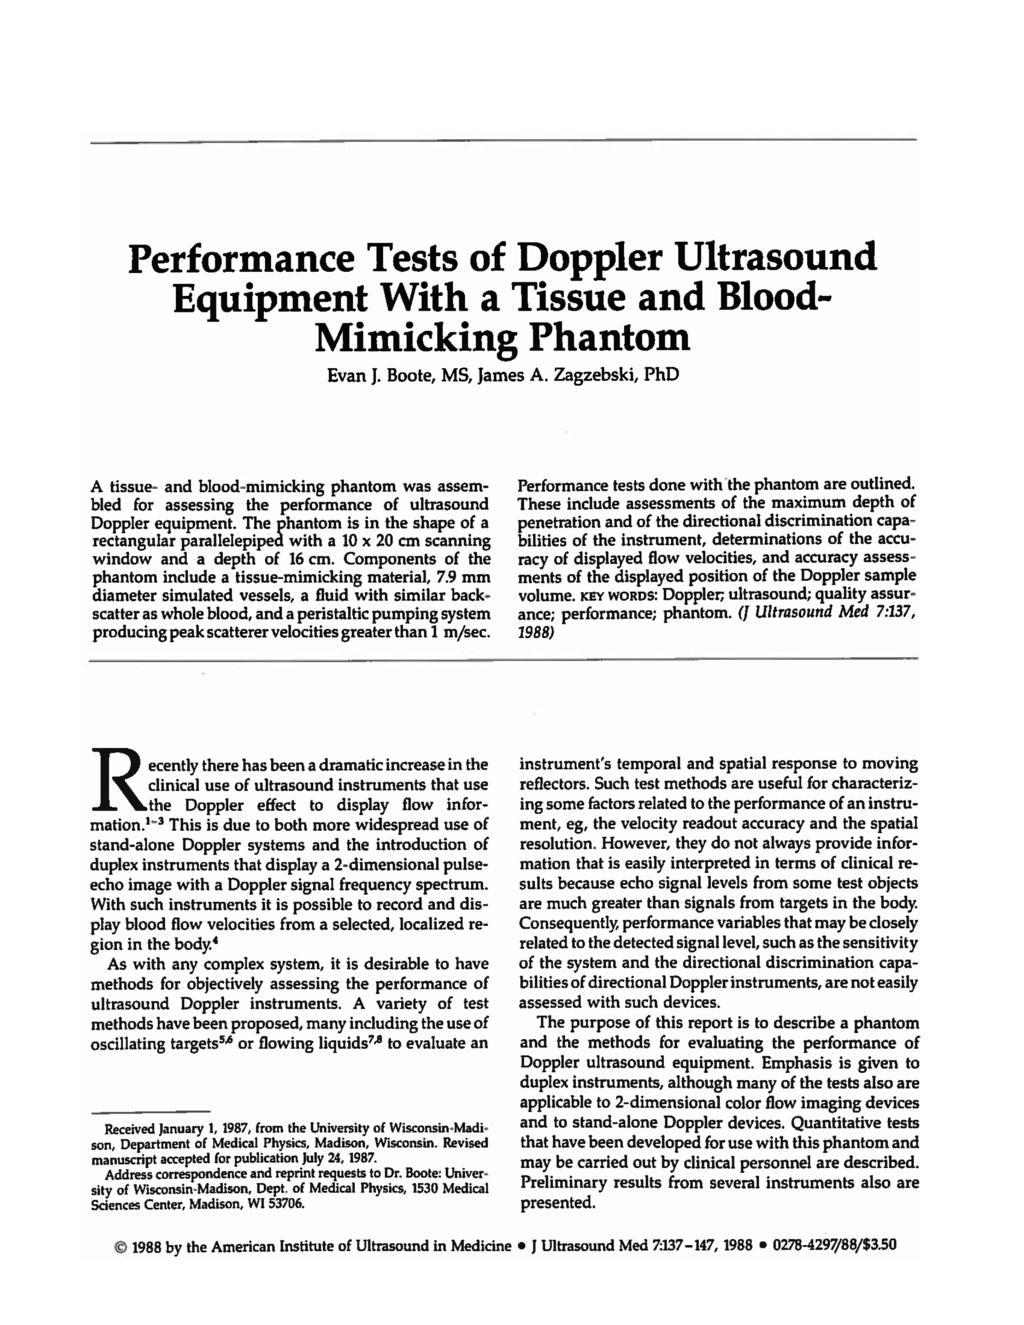 Performance Tests of Doppler Ultrasound Equipment With a Tissue and Blood Mimicking Phantom Evan J. Boote, MS, James A.